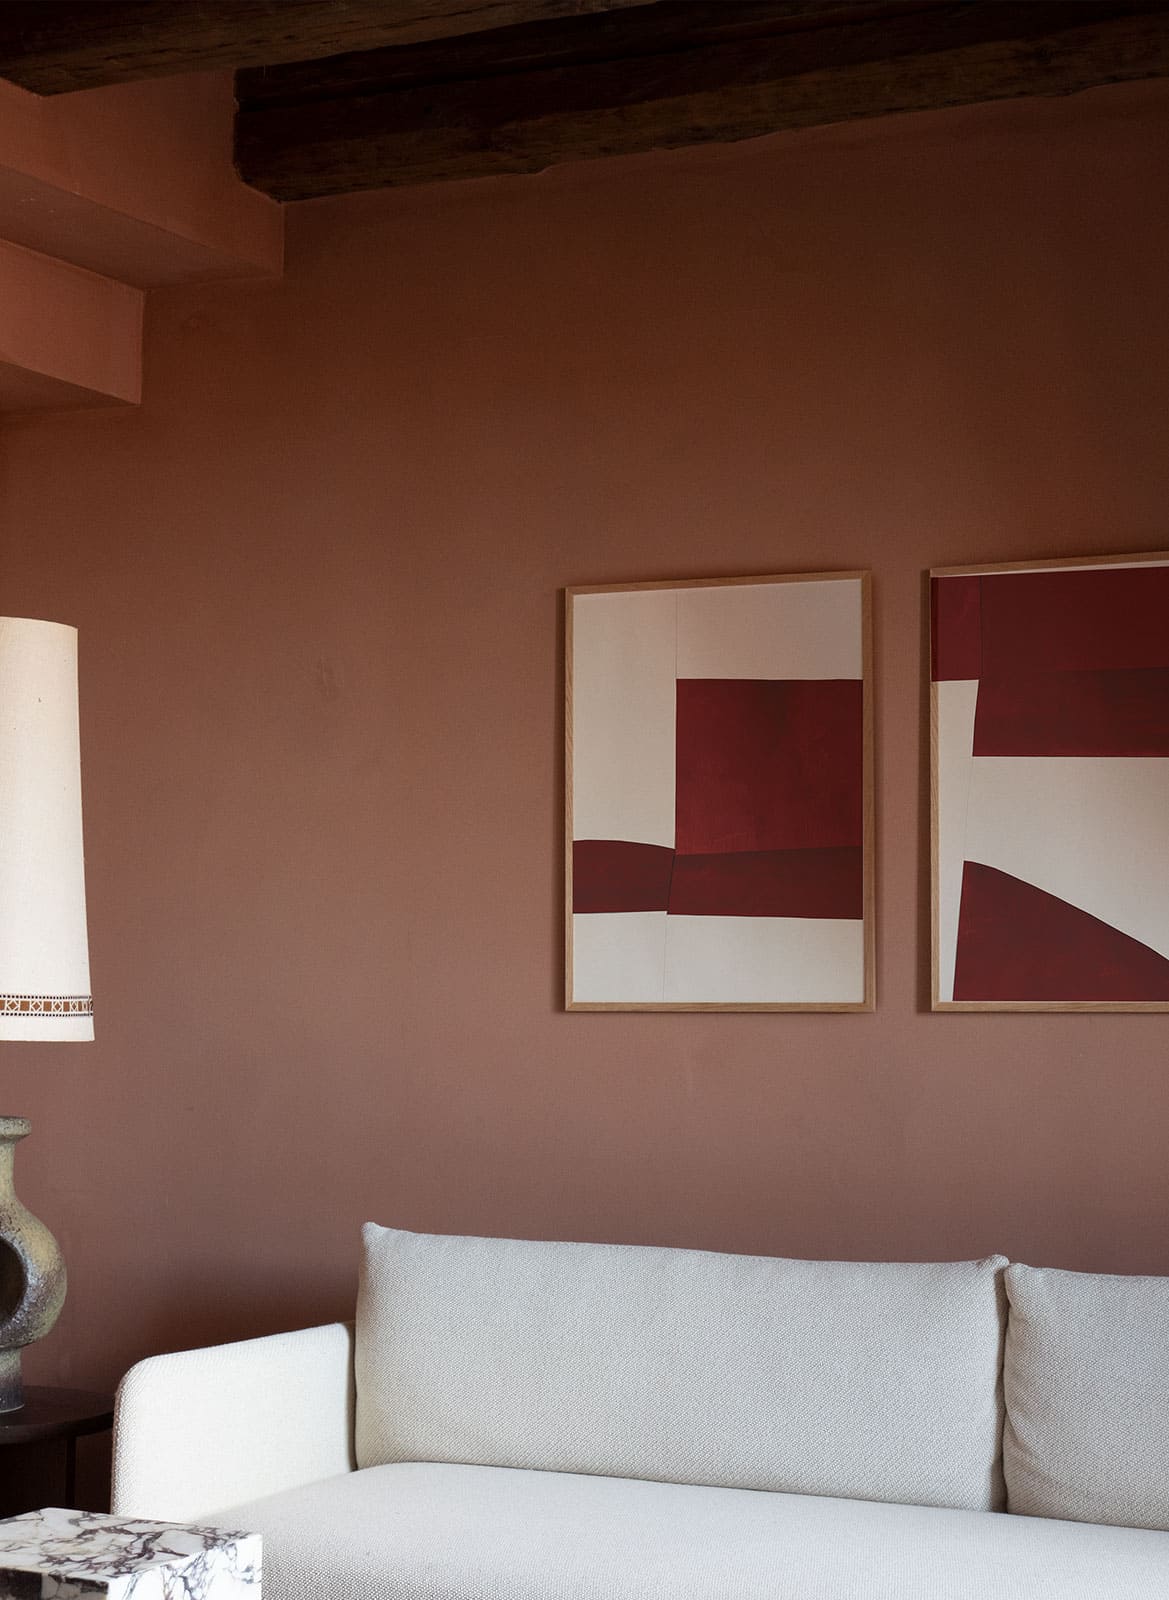 2 framed minimalistic red posters hanging above a couch by atelier cph